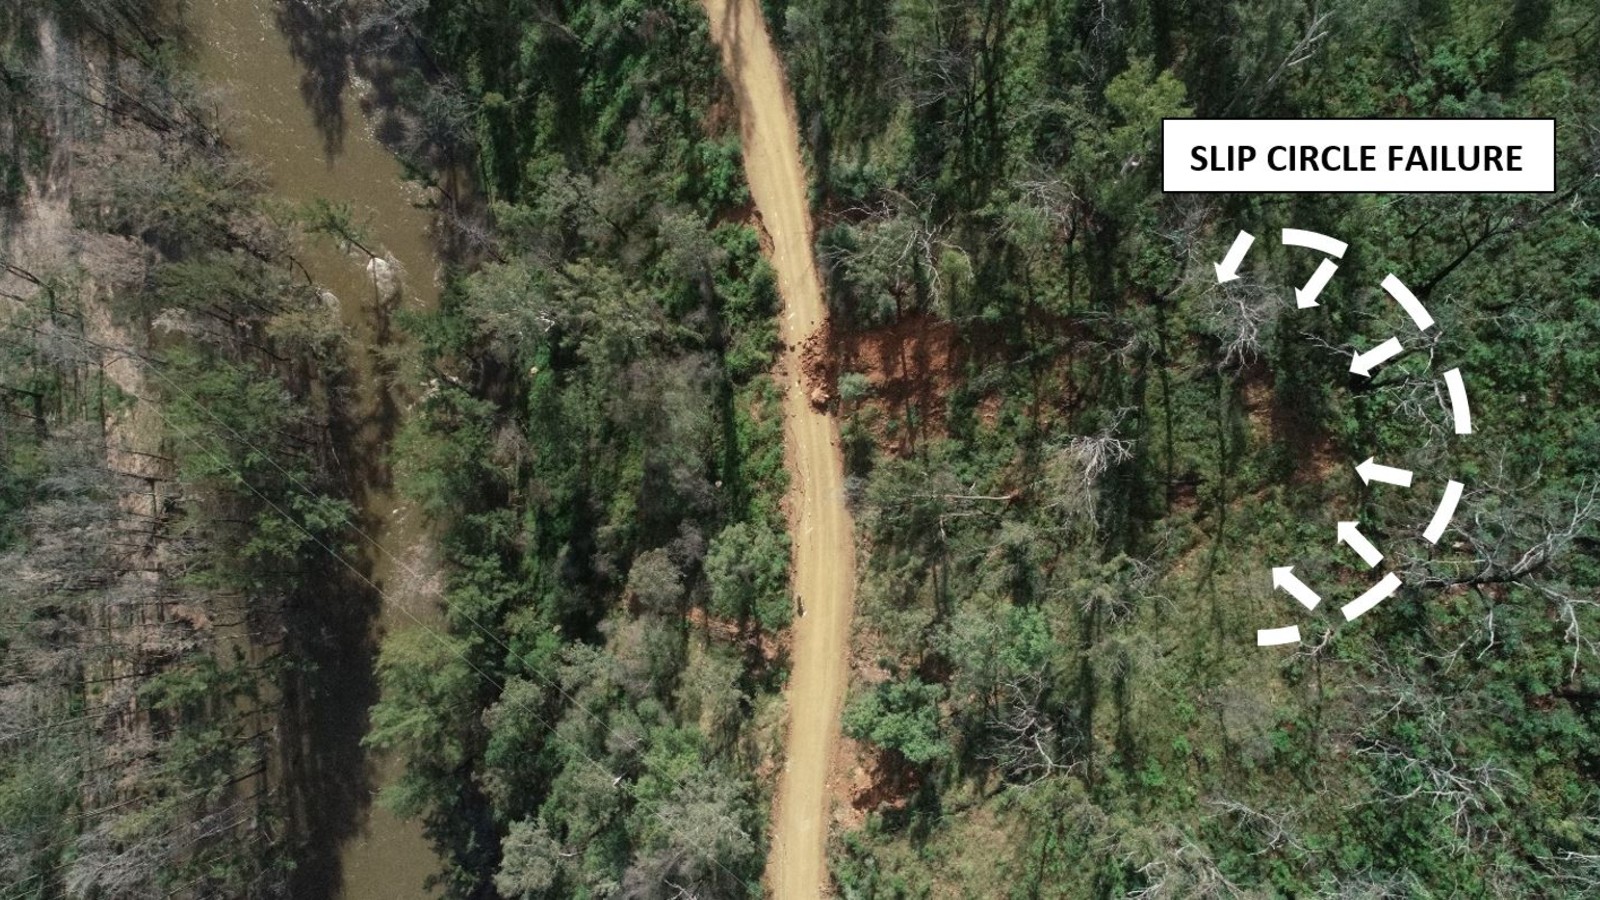 An aerial image shows the location of a large slip circle above a landslide covering half the road and long cracks on the downhill side of the road